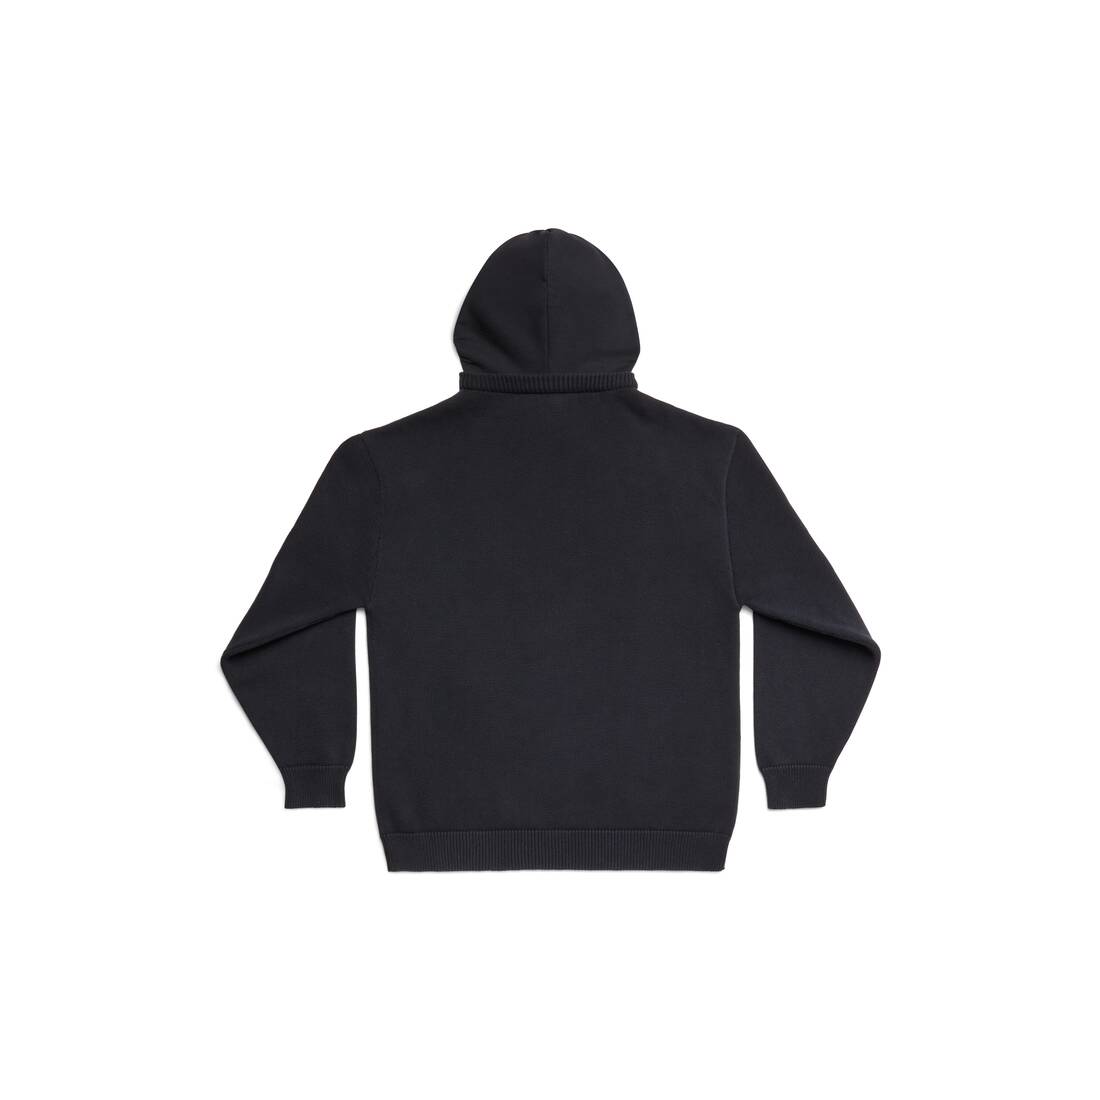 Metal Patched Hoodie Vネック セーター で ブラック